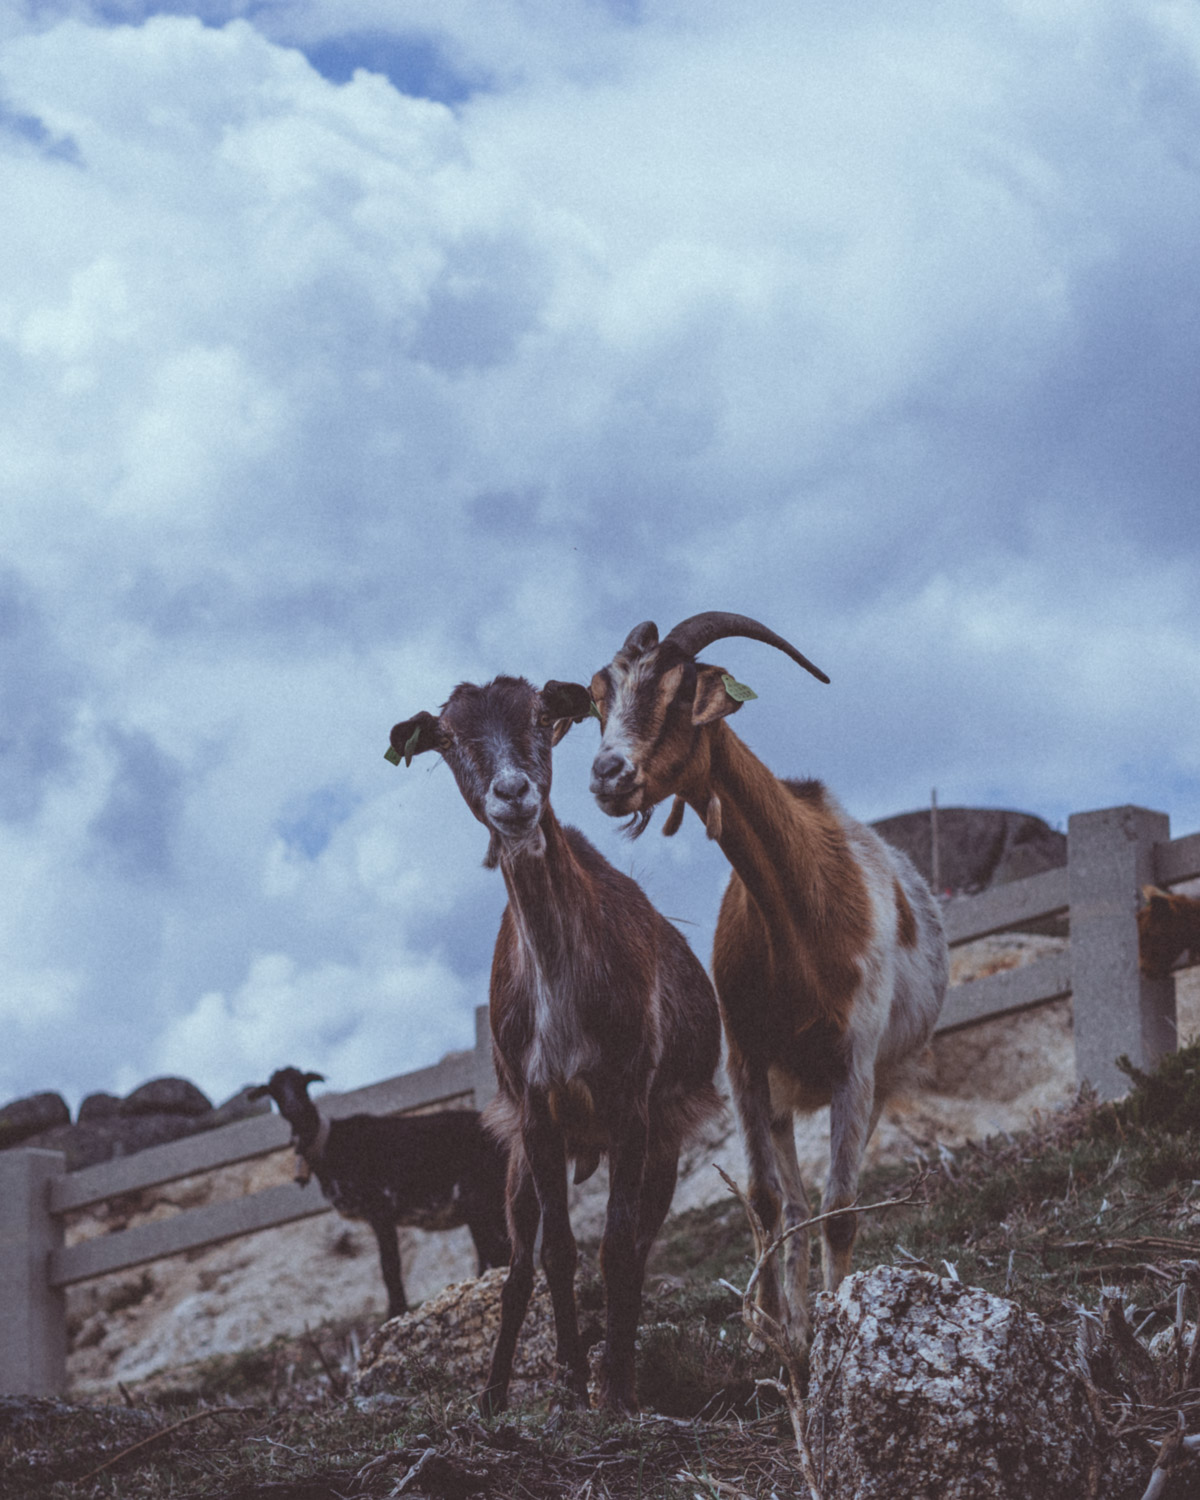 Two goats with cloudy sky behind | Cycle of Life and Death